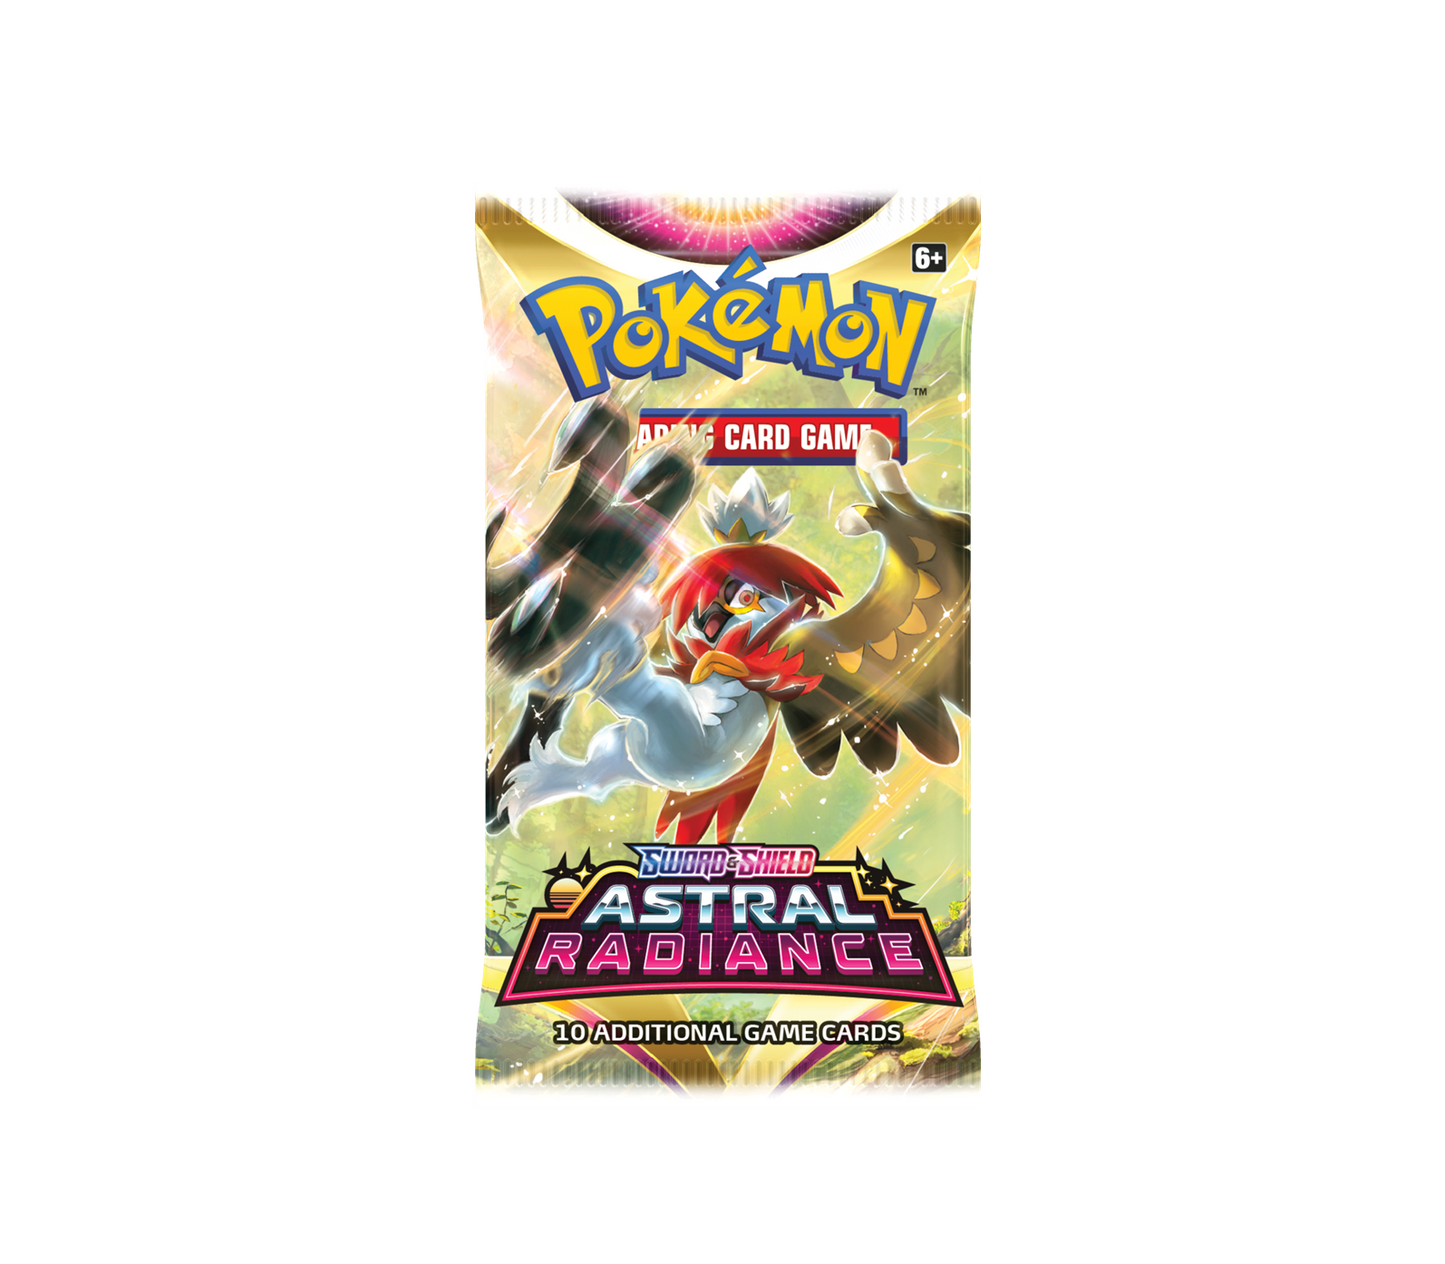 Pokémon TCG booster Sword & Shield Astral Radiance Boosterpack